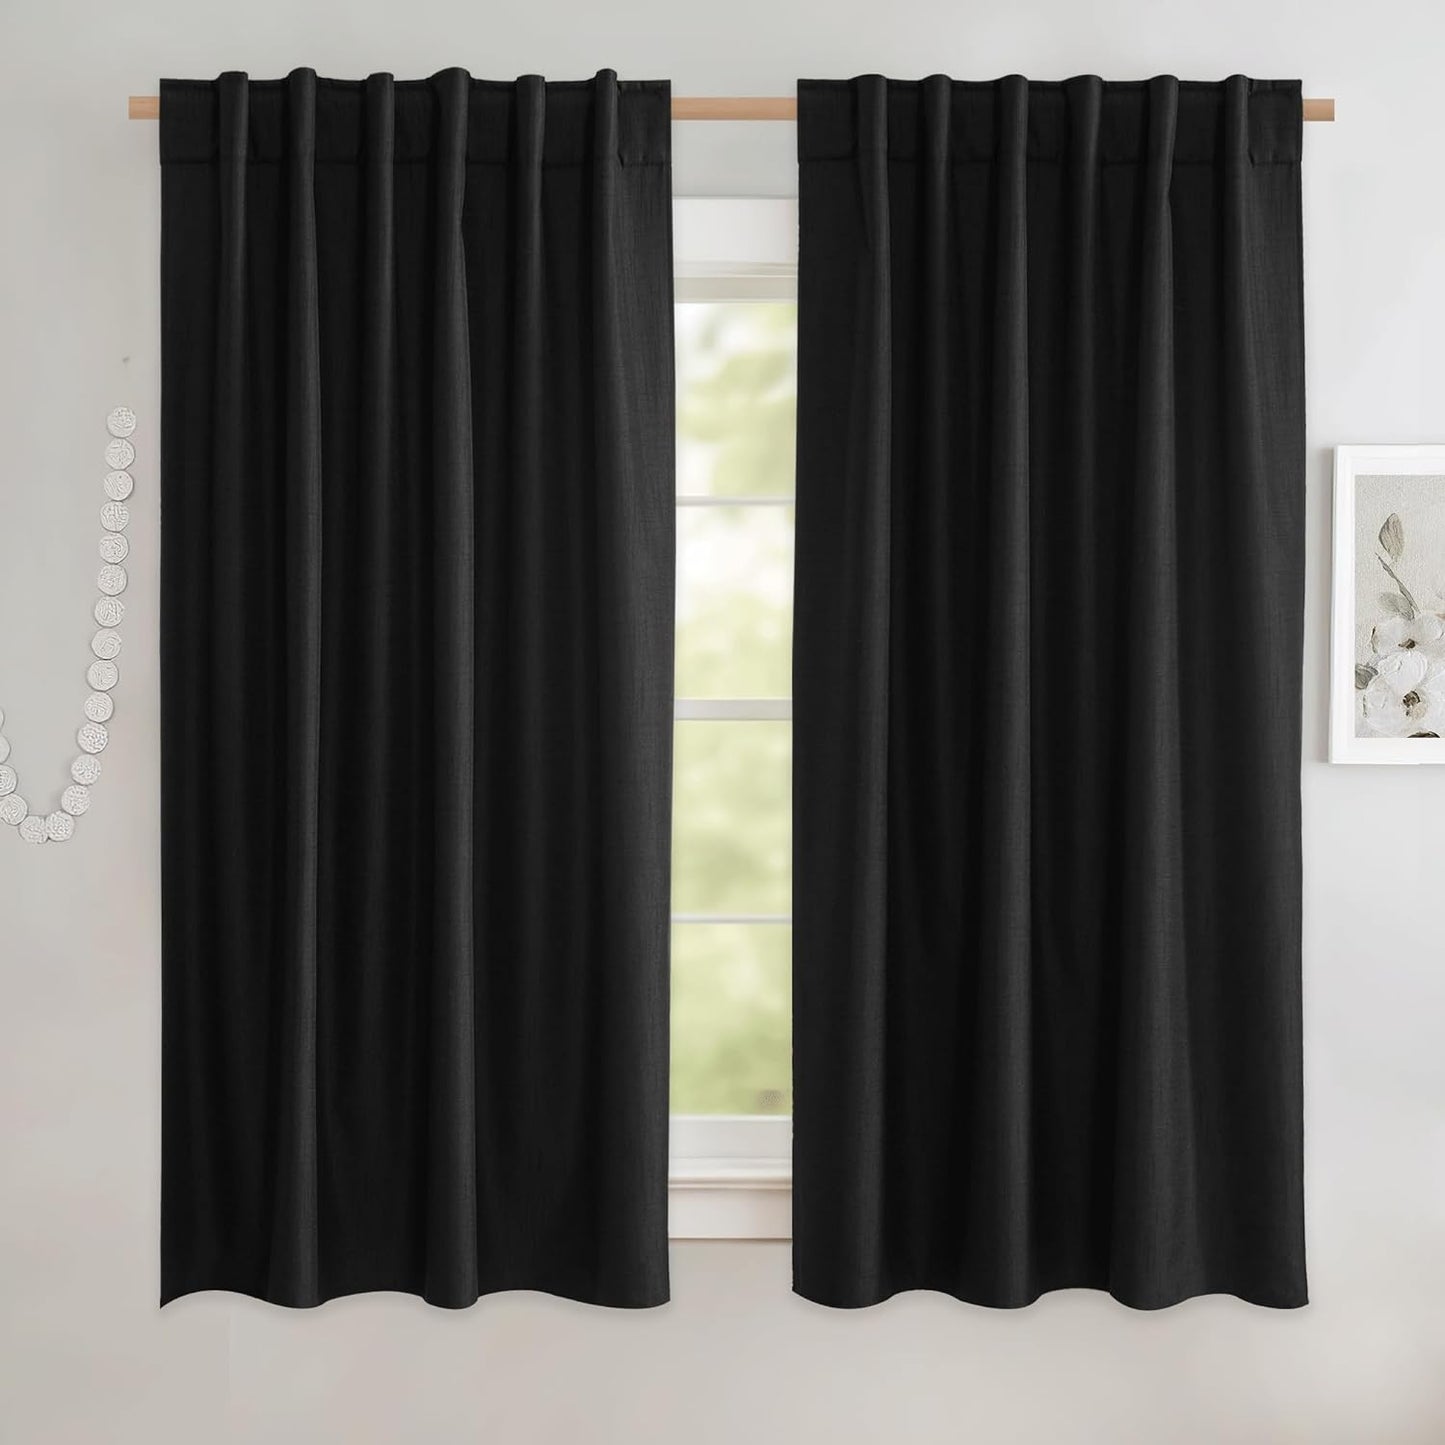 NICETOWN 100% Blackout Linen Curtains for Living Room with Thermal Insulated White Liner, Ivory, 52" Wide, 2 Panels, 84" Long Drapes, Back Tab Retro Linen Curtains Vertical Drapes Privacy for Bedroom  NICETOWN Black W52 X L63 